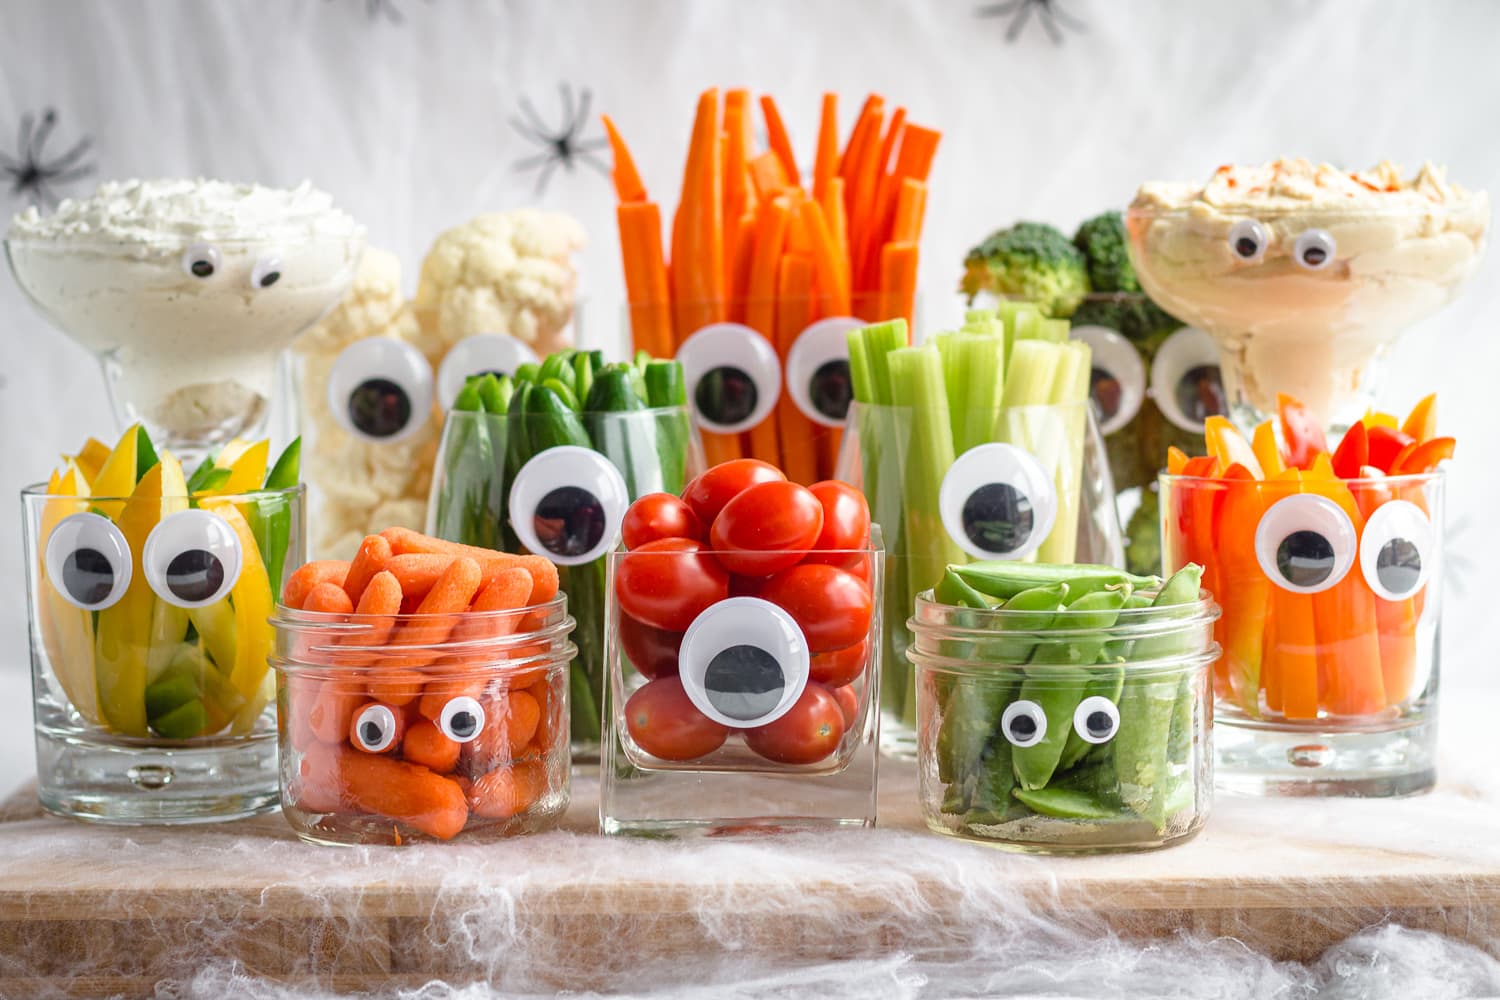 A monster Halloween themed veggie tray featuring a variety of glassware with googly eyes filled with different veggies and dip.